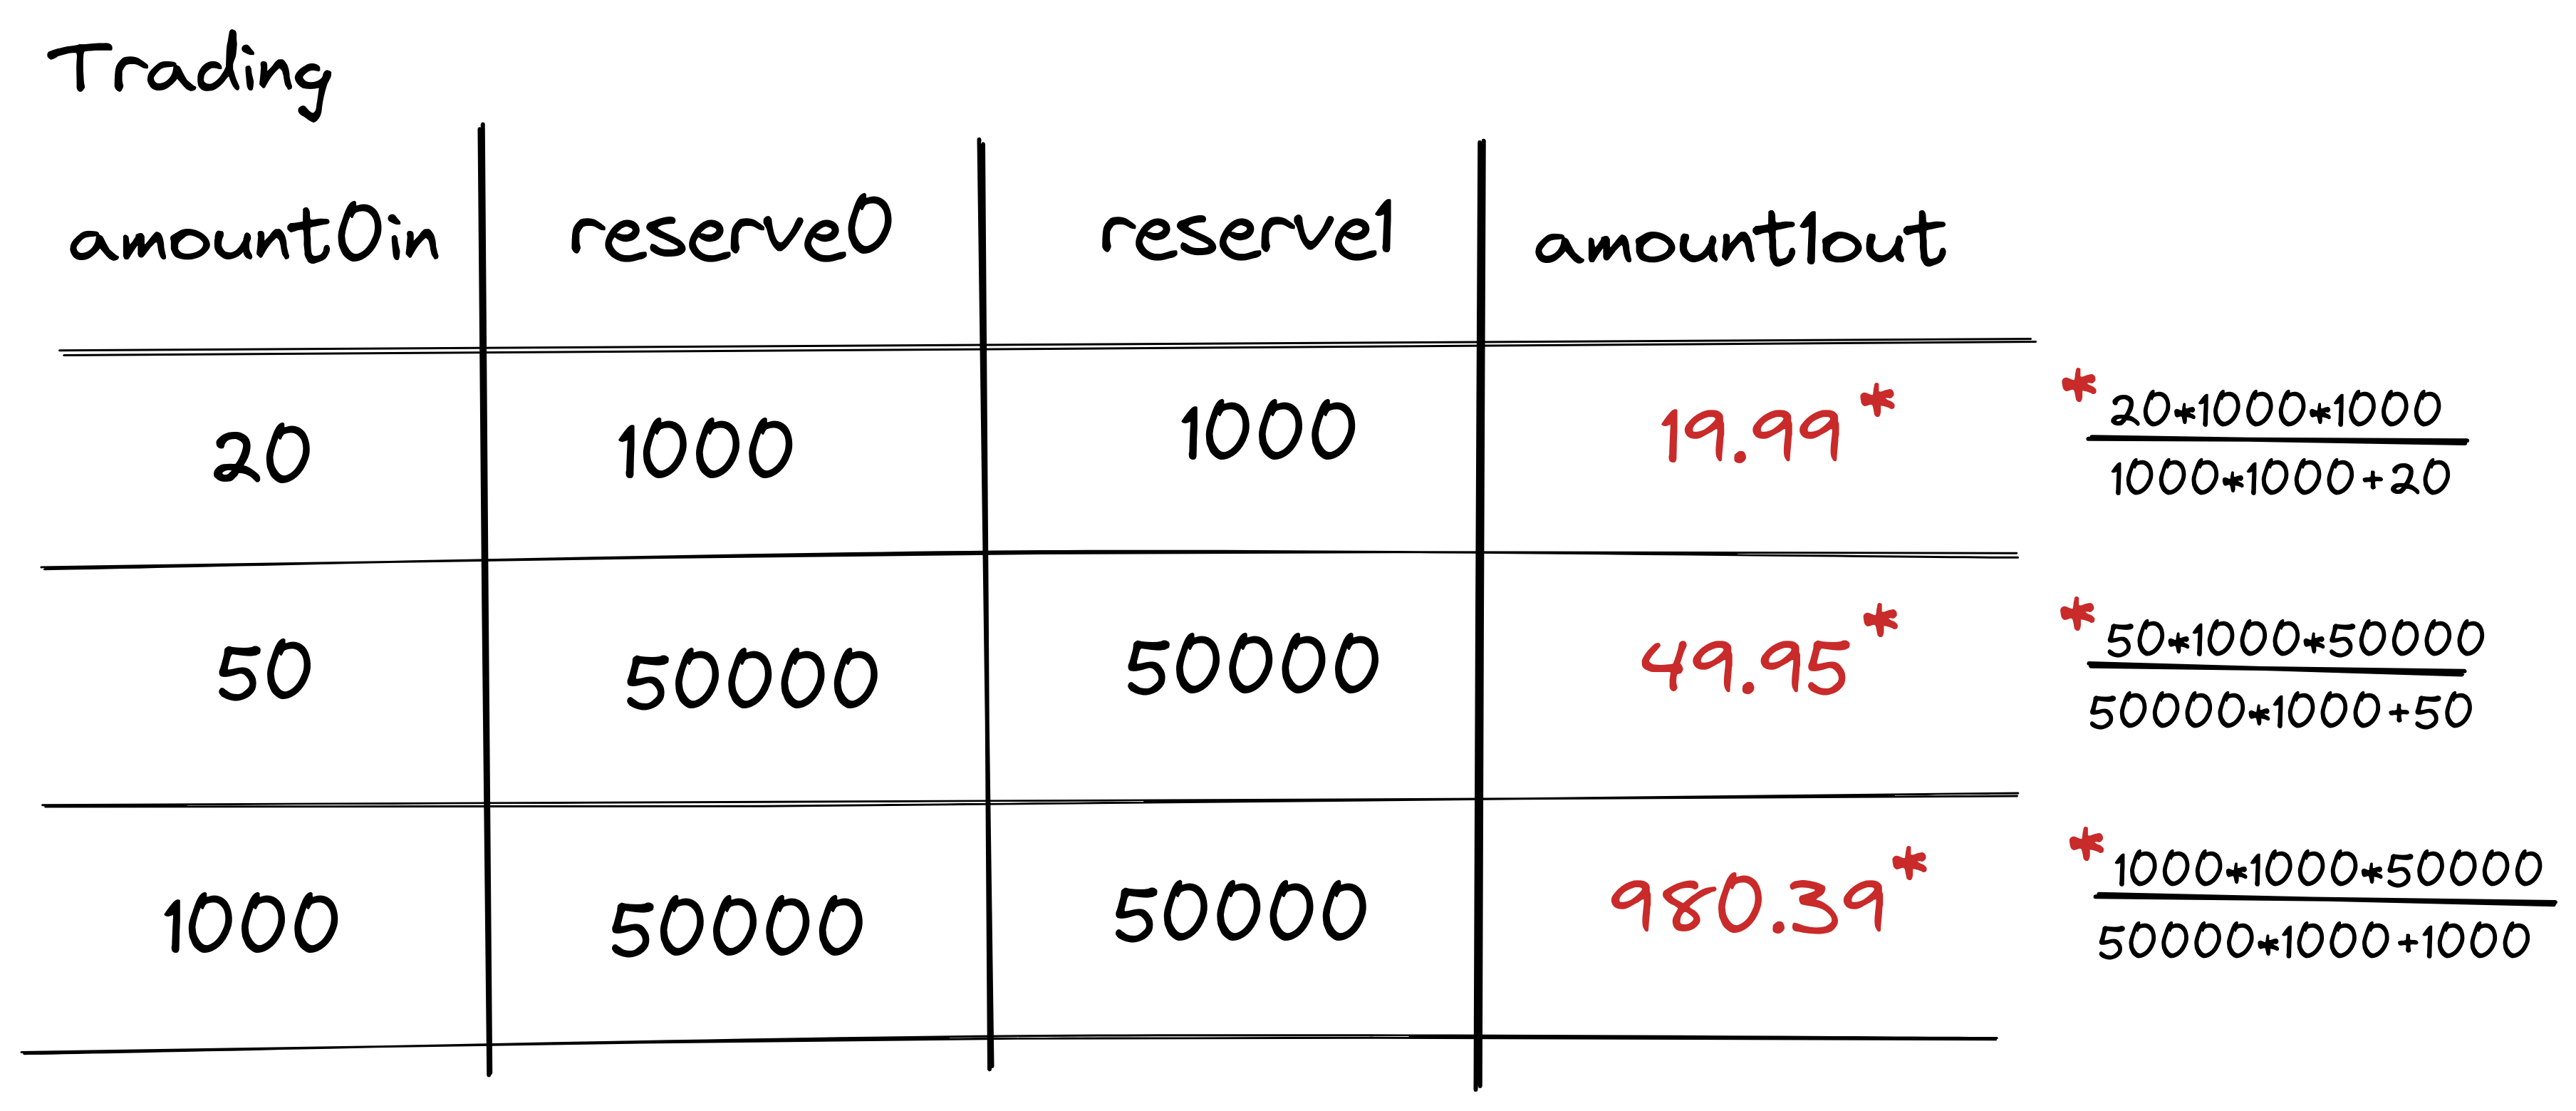 Table showing the amount out depending on the amount in and reserves